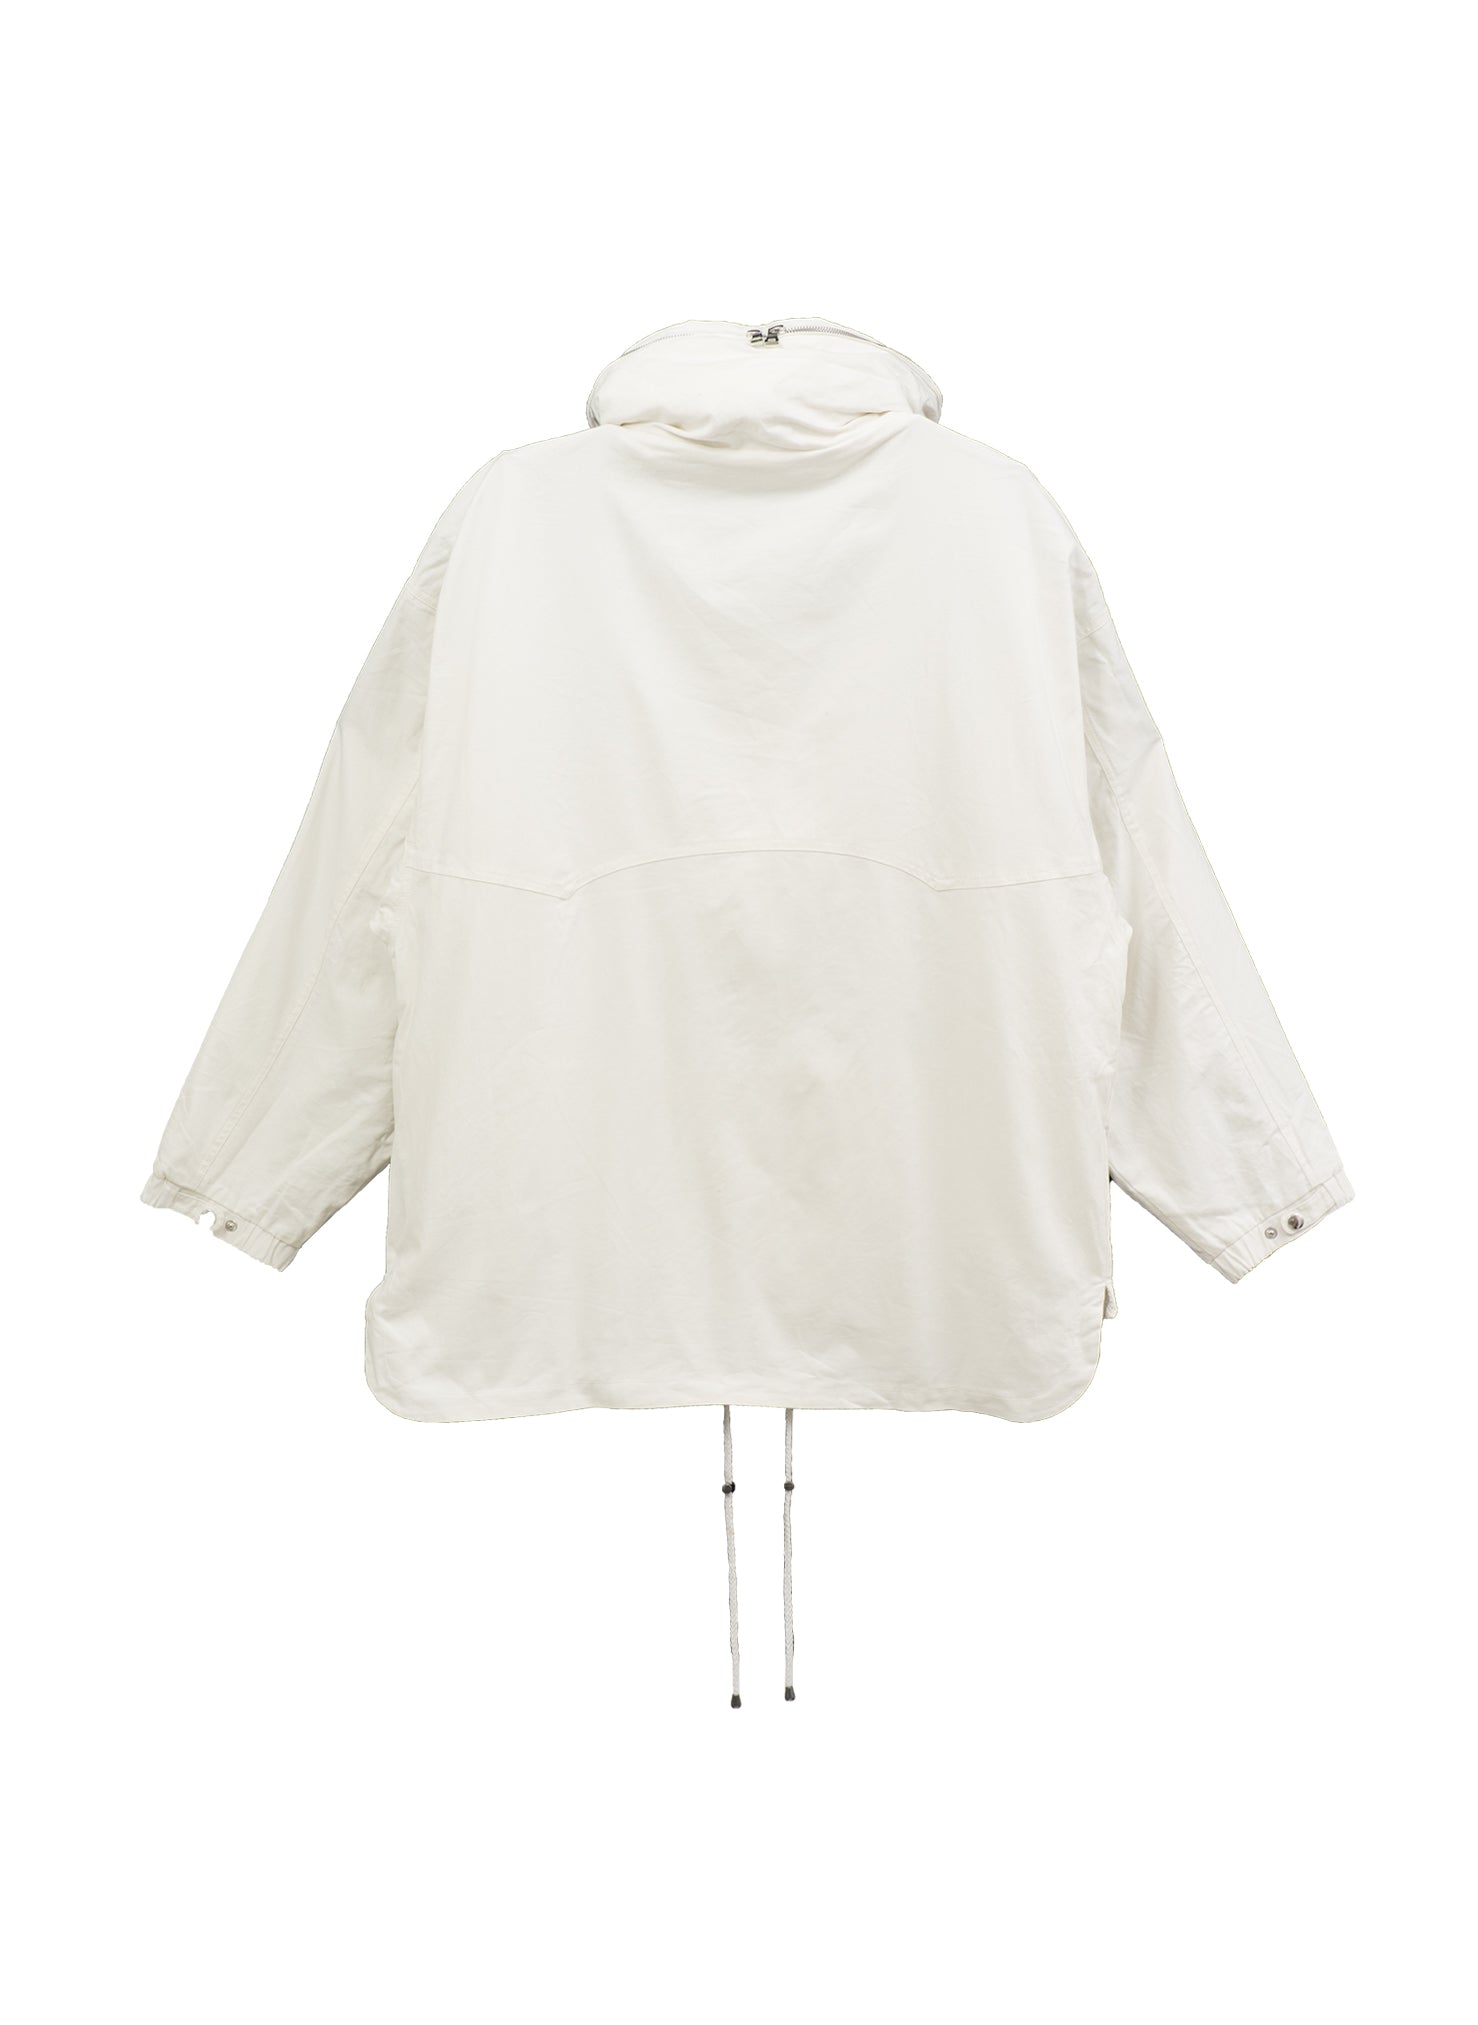 <span style="color: #f50b0b;">Last One</span> WILLY CHAVARRIA / COWBOY PARKA WHITE